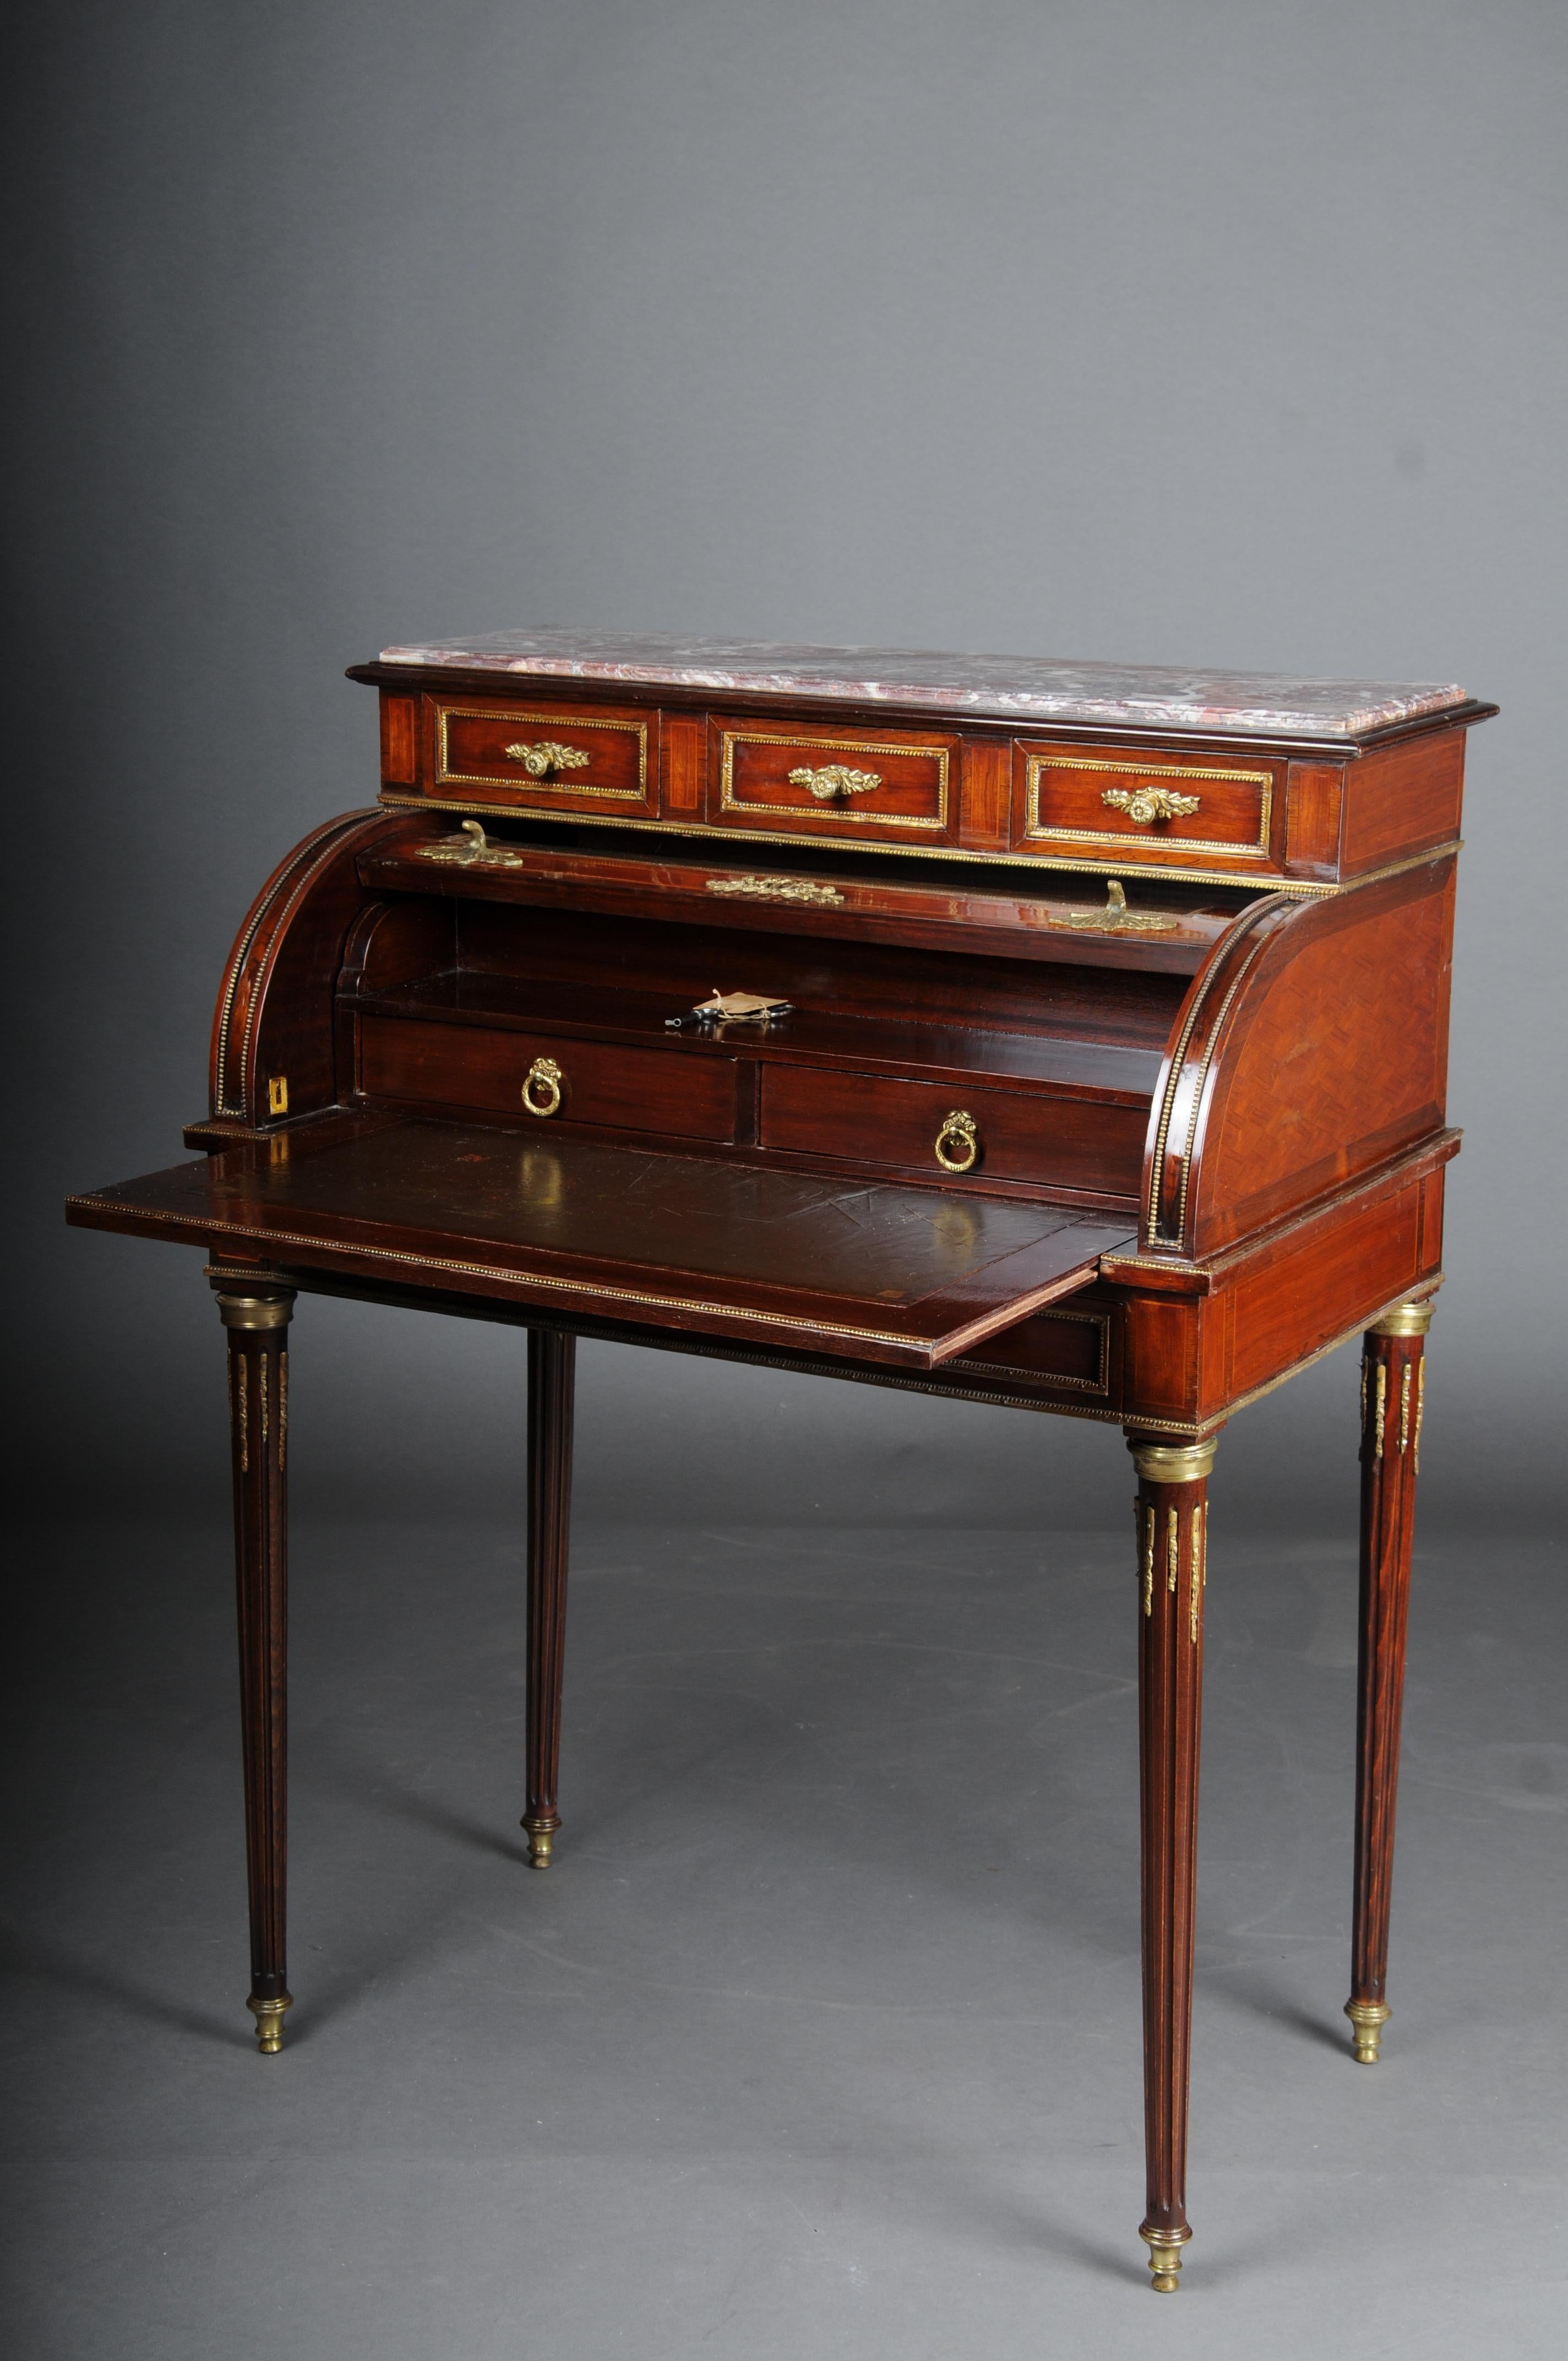 Impressive rolling secretary in Louis XVI, 20th Century.

Scroll function with a Watteau painting, signed. Extendable writing surface covered with leather. Rich marquetry on the side. Marble top plate.
High fluted legs with partially gilded